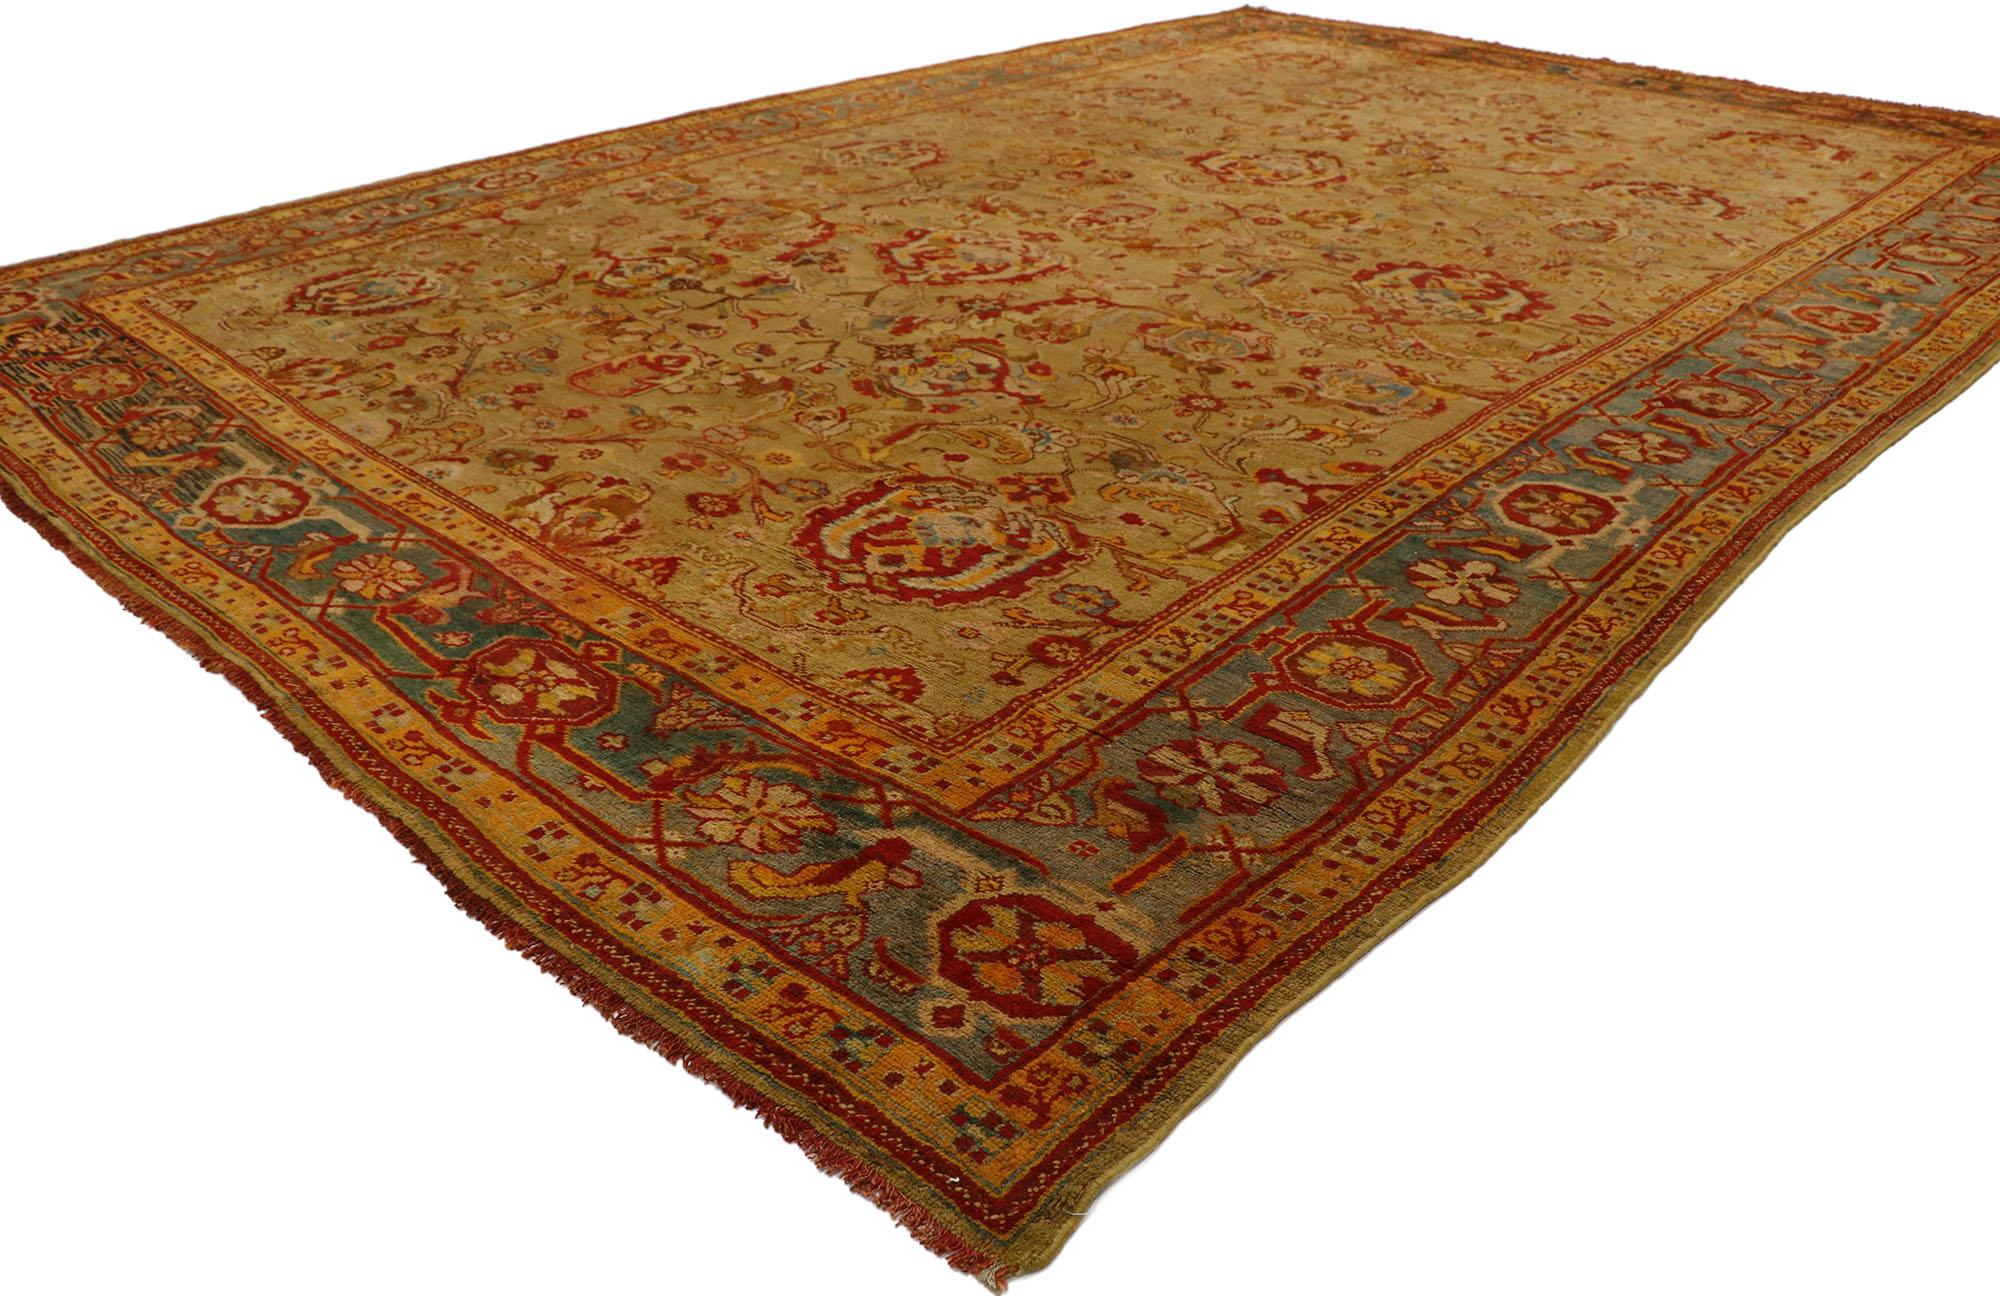 77550, antique Turkish Oushak rug with warm and rustic Mediterranean style. Displaying well-balanced symmetry and a simple design aesthetic, this hand knotted wool antique Turkish Oushak rug beautifully embodies warm Mediterranean style with rustic